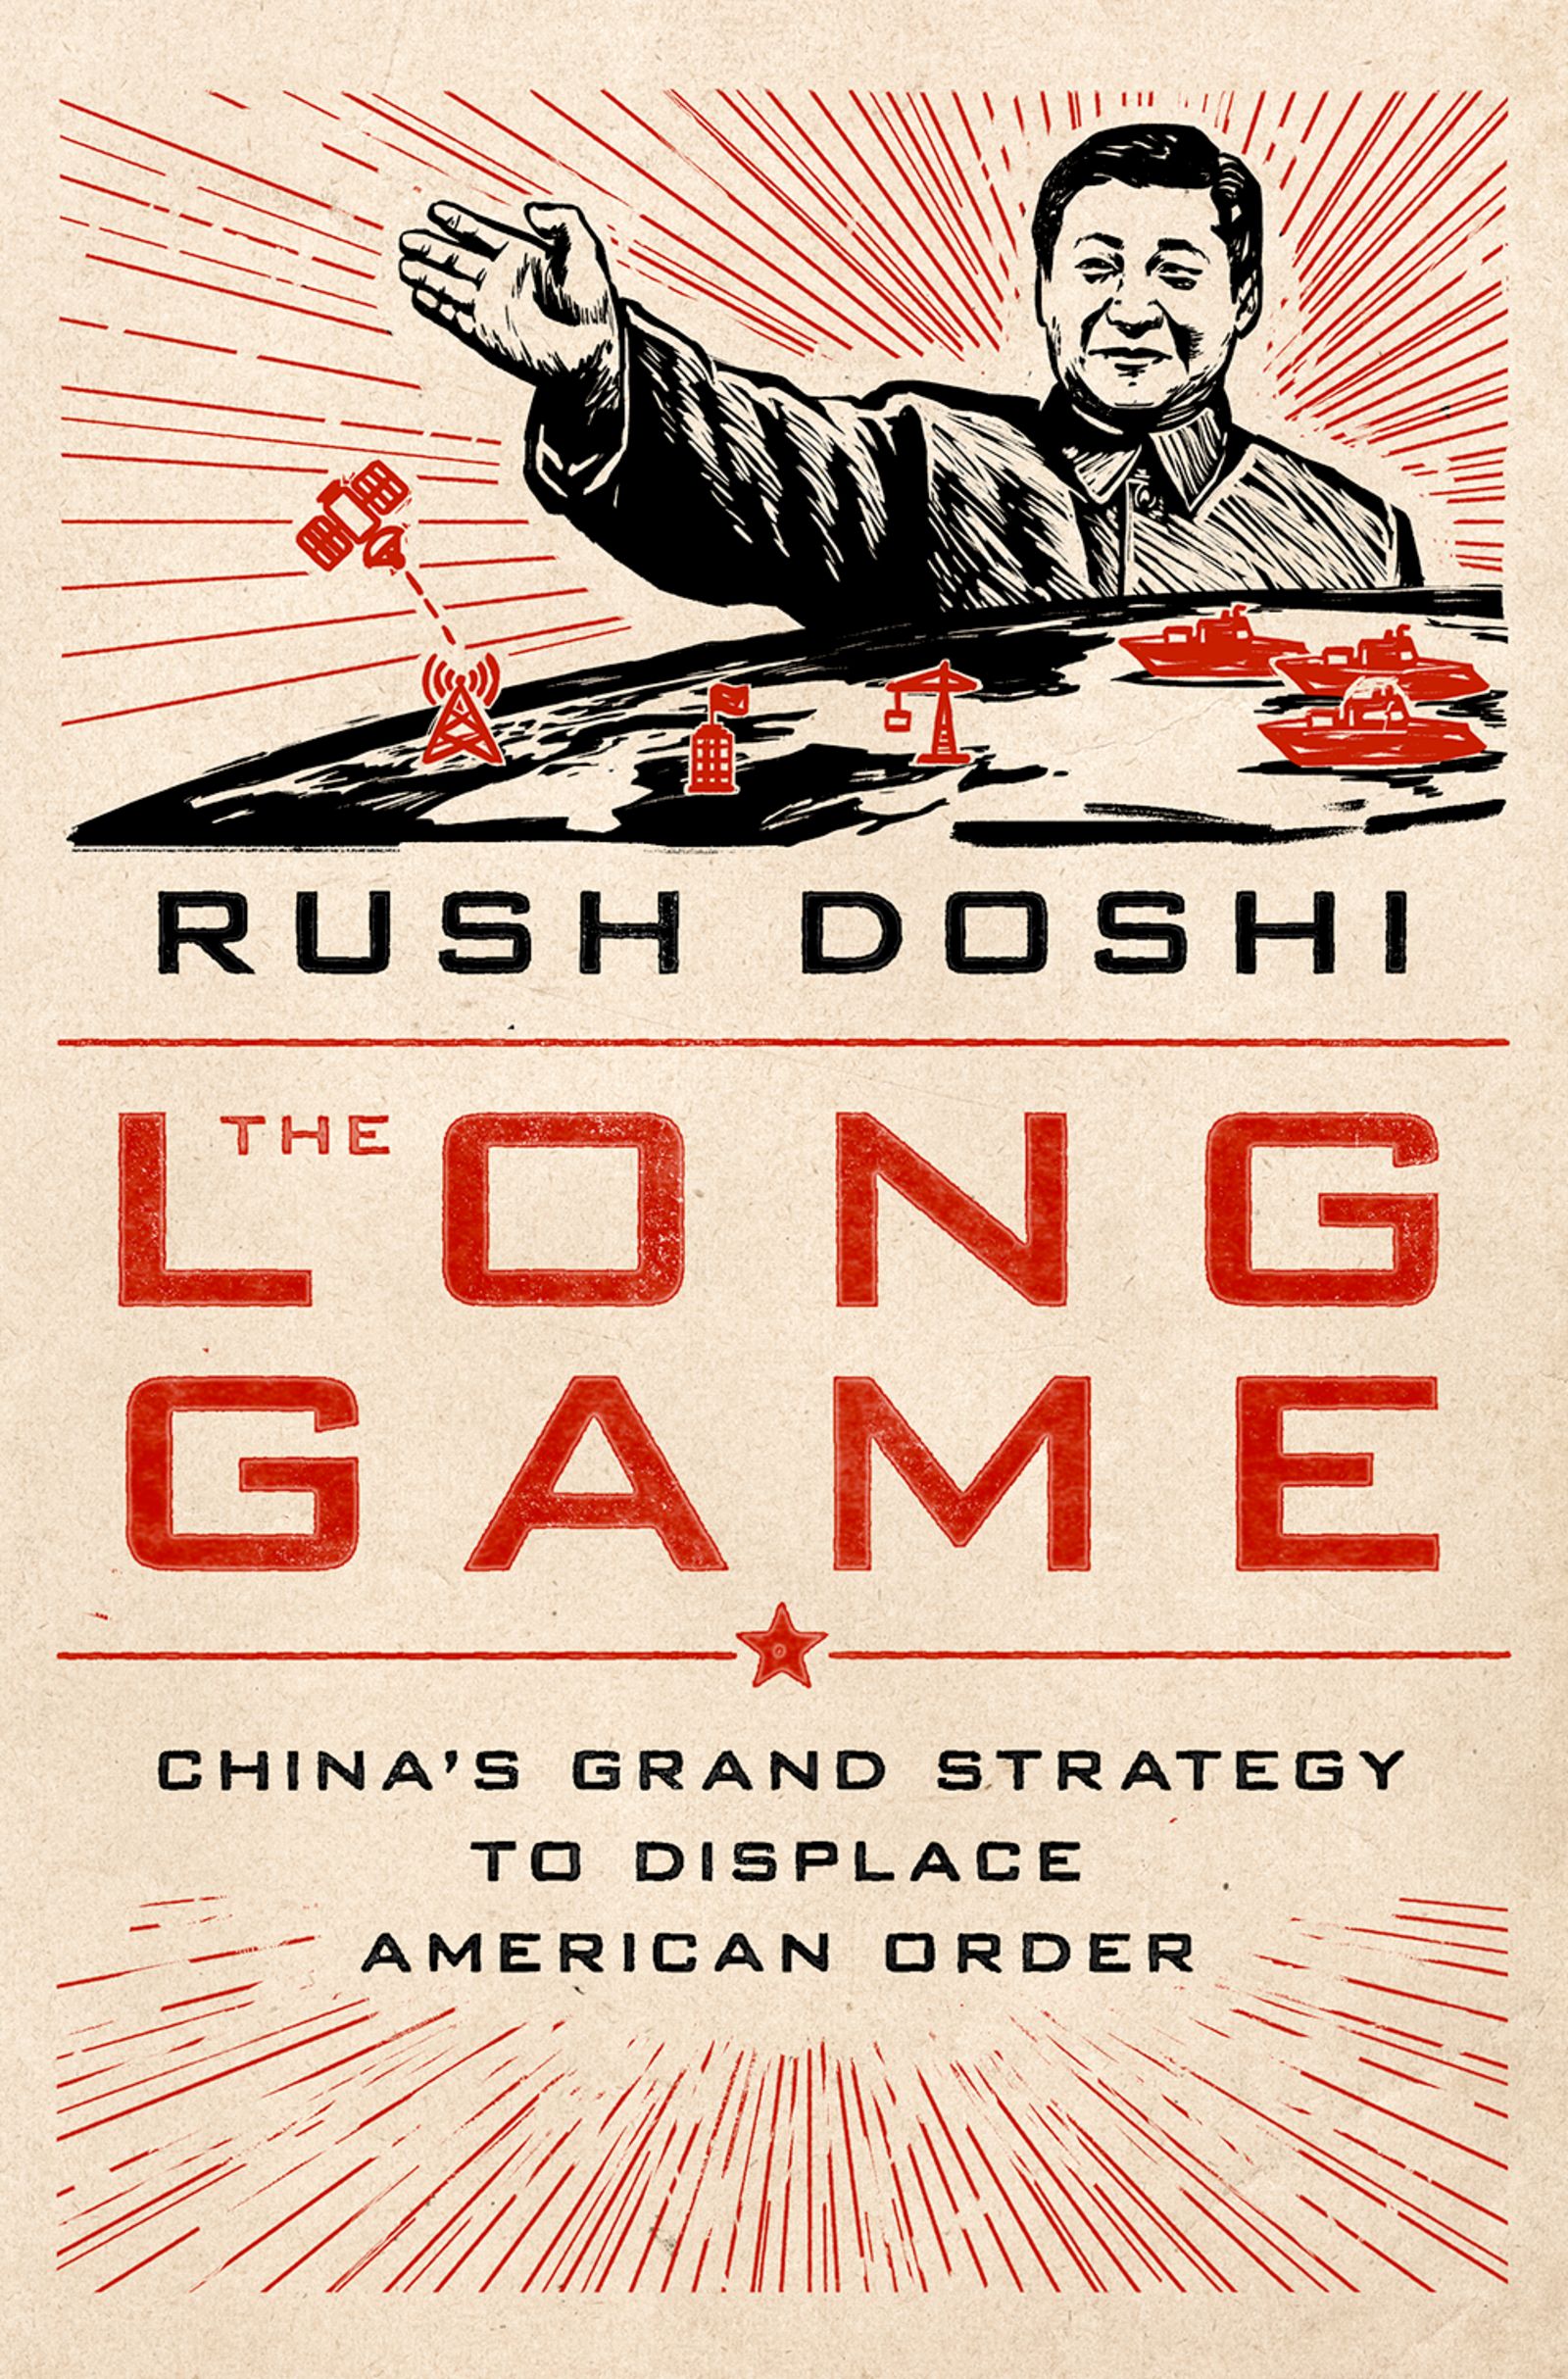 The Long Game by Rush Doshi